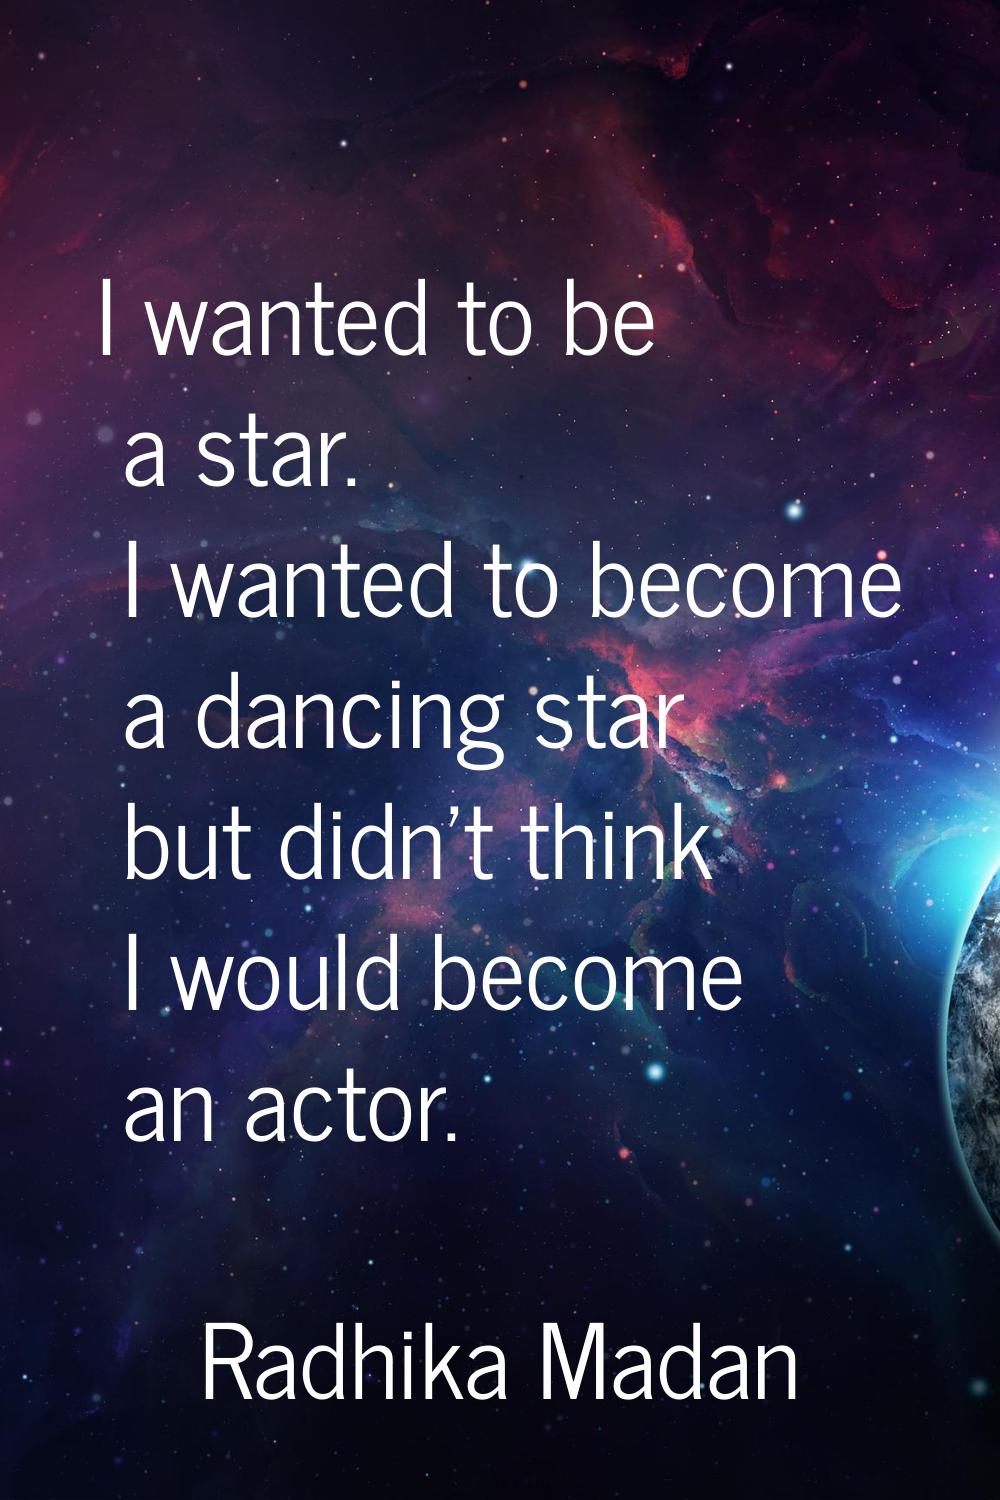 I wanted to be a star. I wanted to become a dancing star but didn't think I would become an actor.